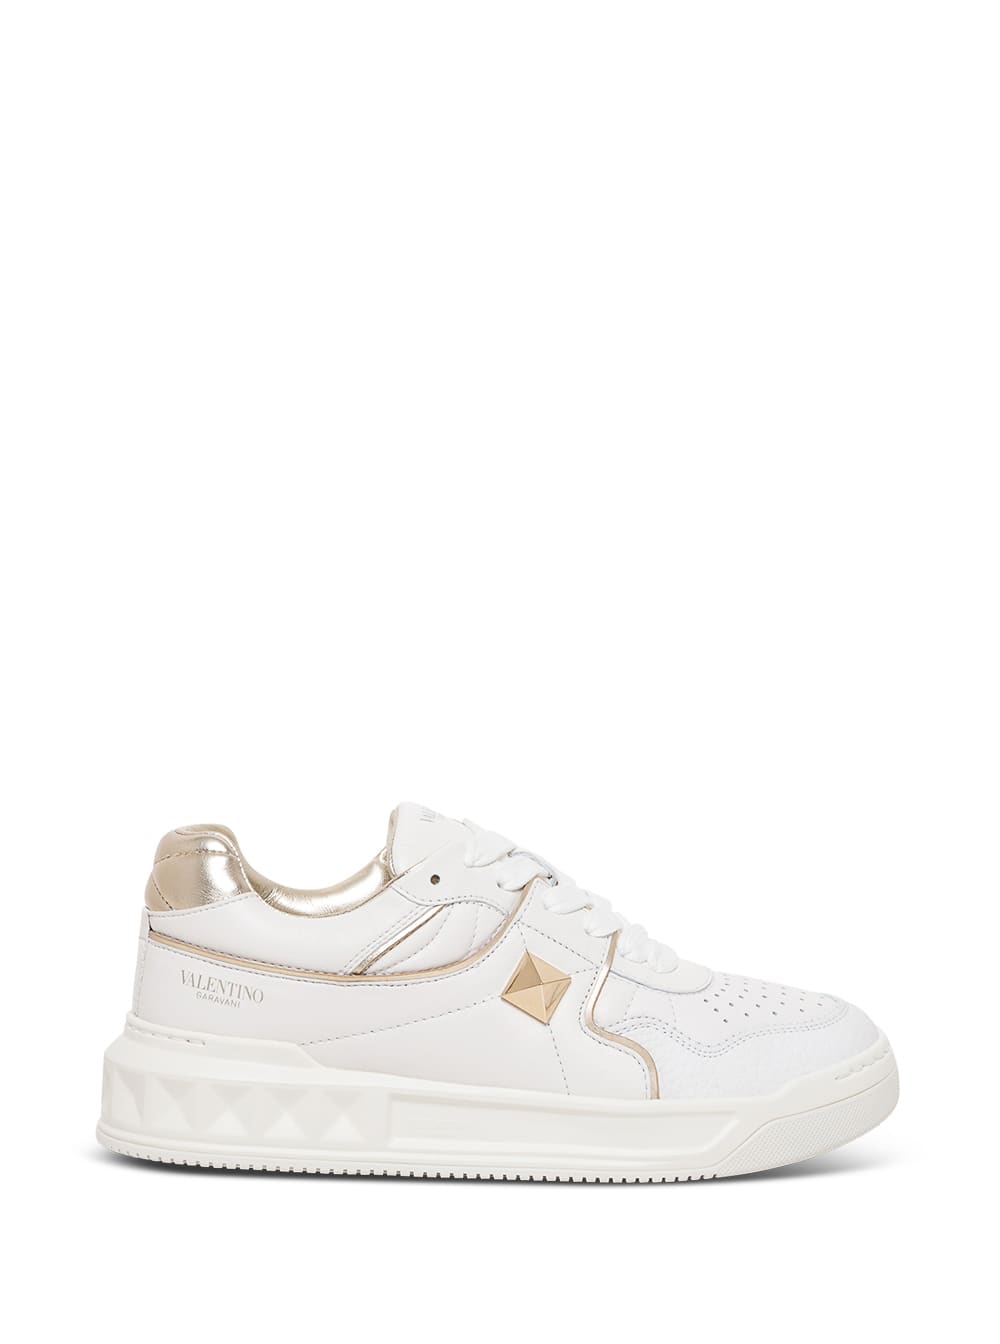 Valentino Garavani White And Gold One Stud Leather Sneakers